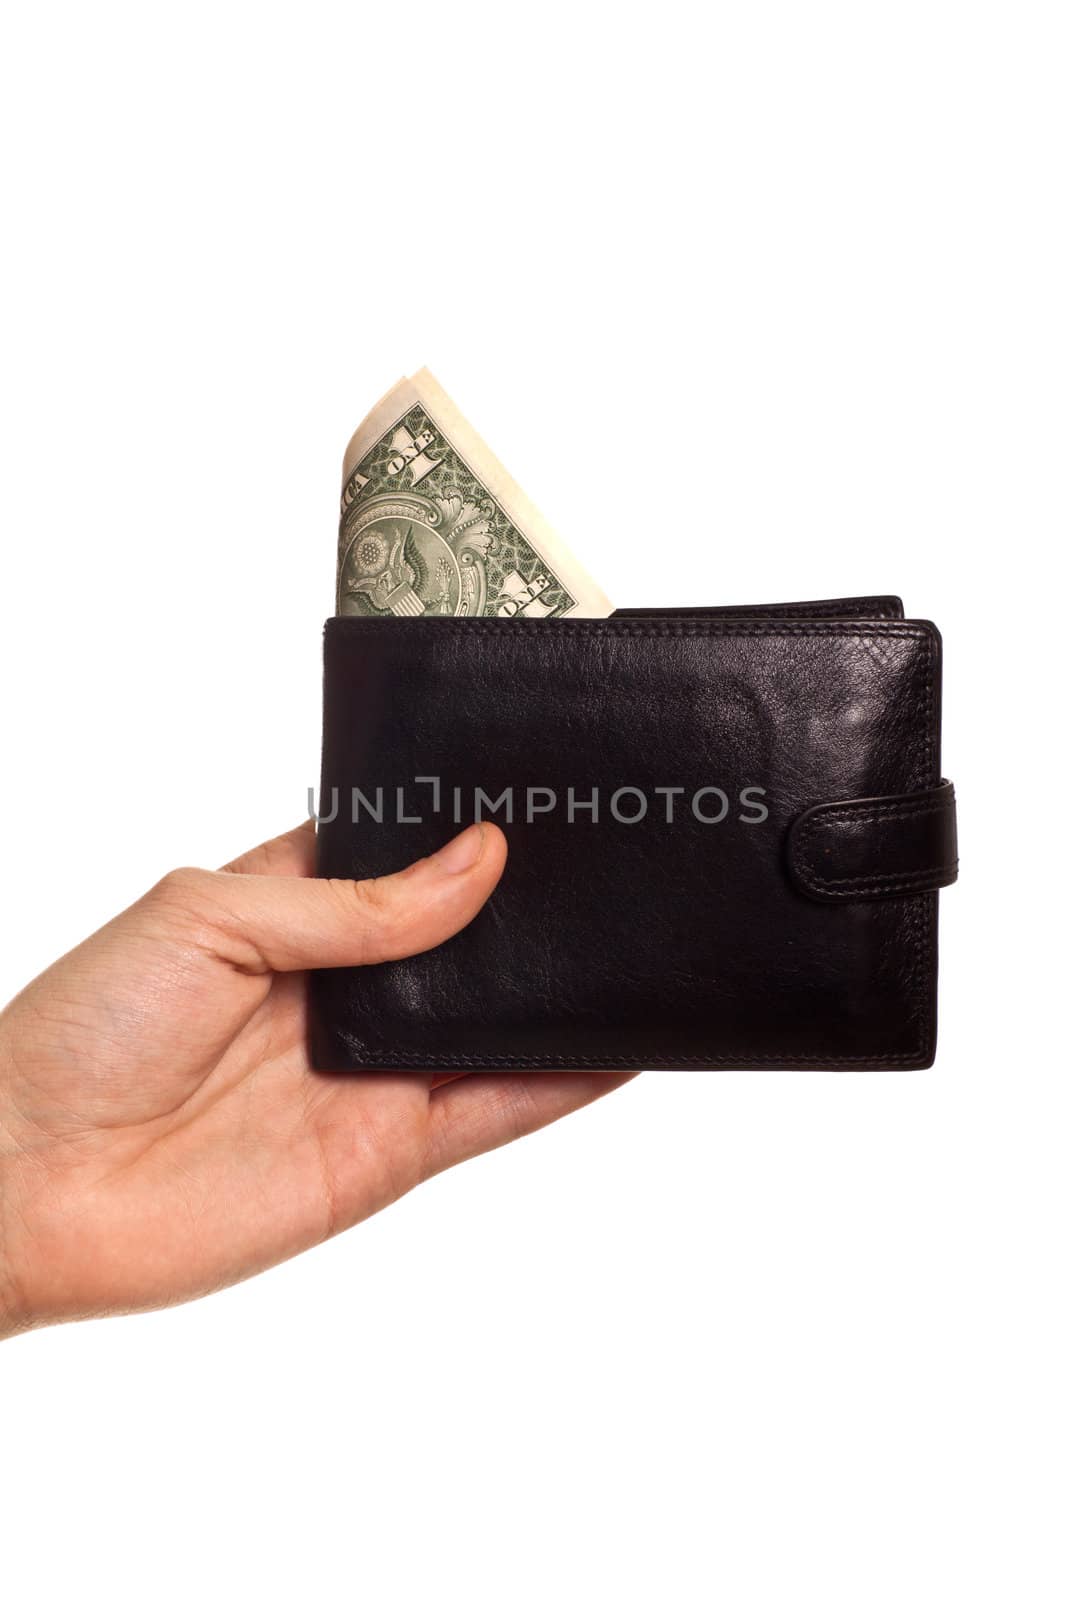 hand holding purse with dollar by shutswis